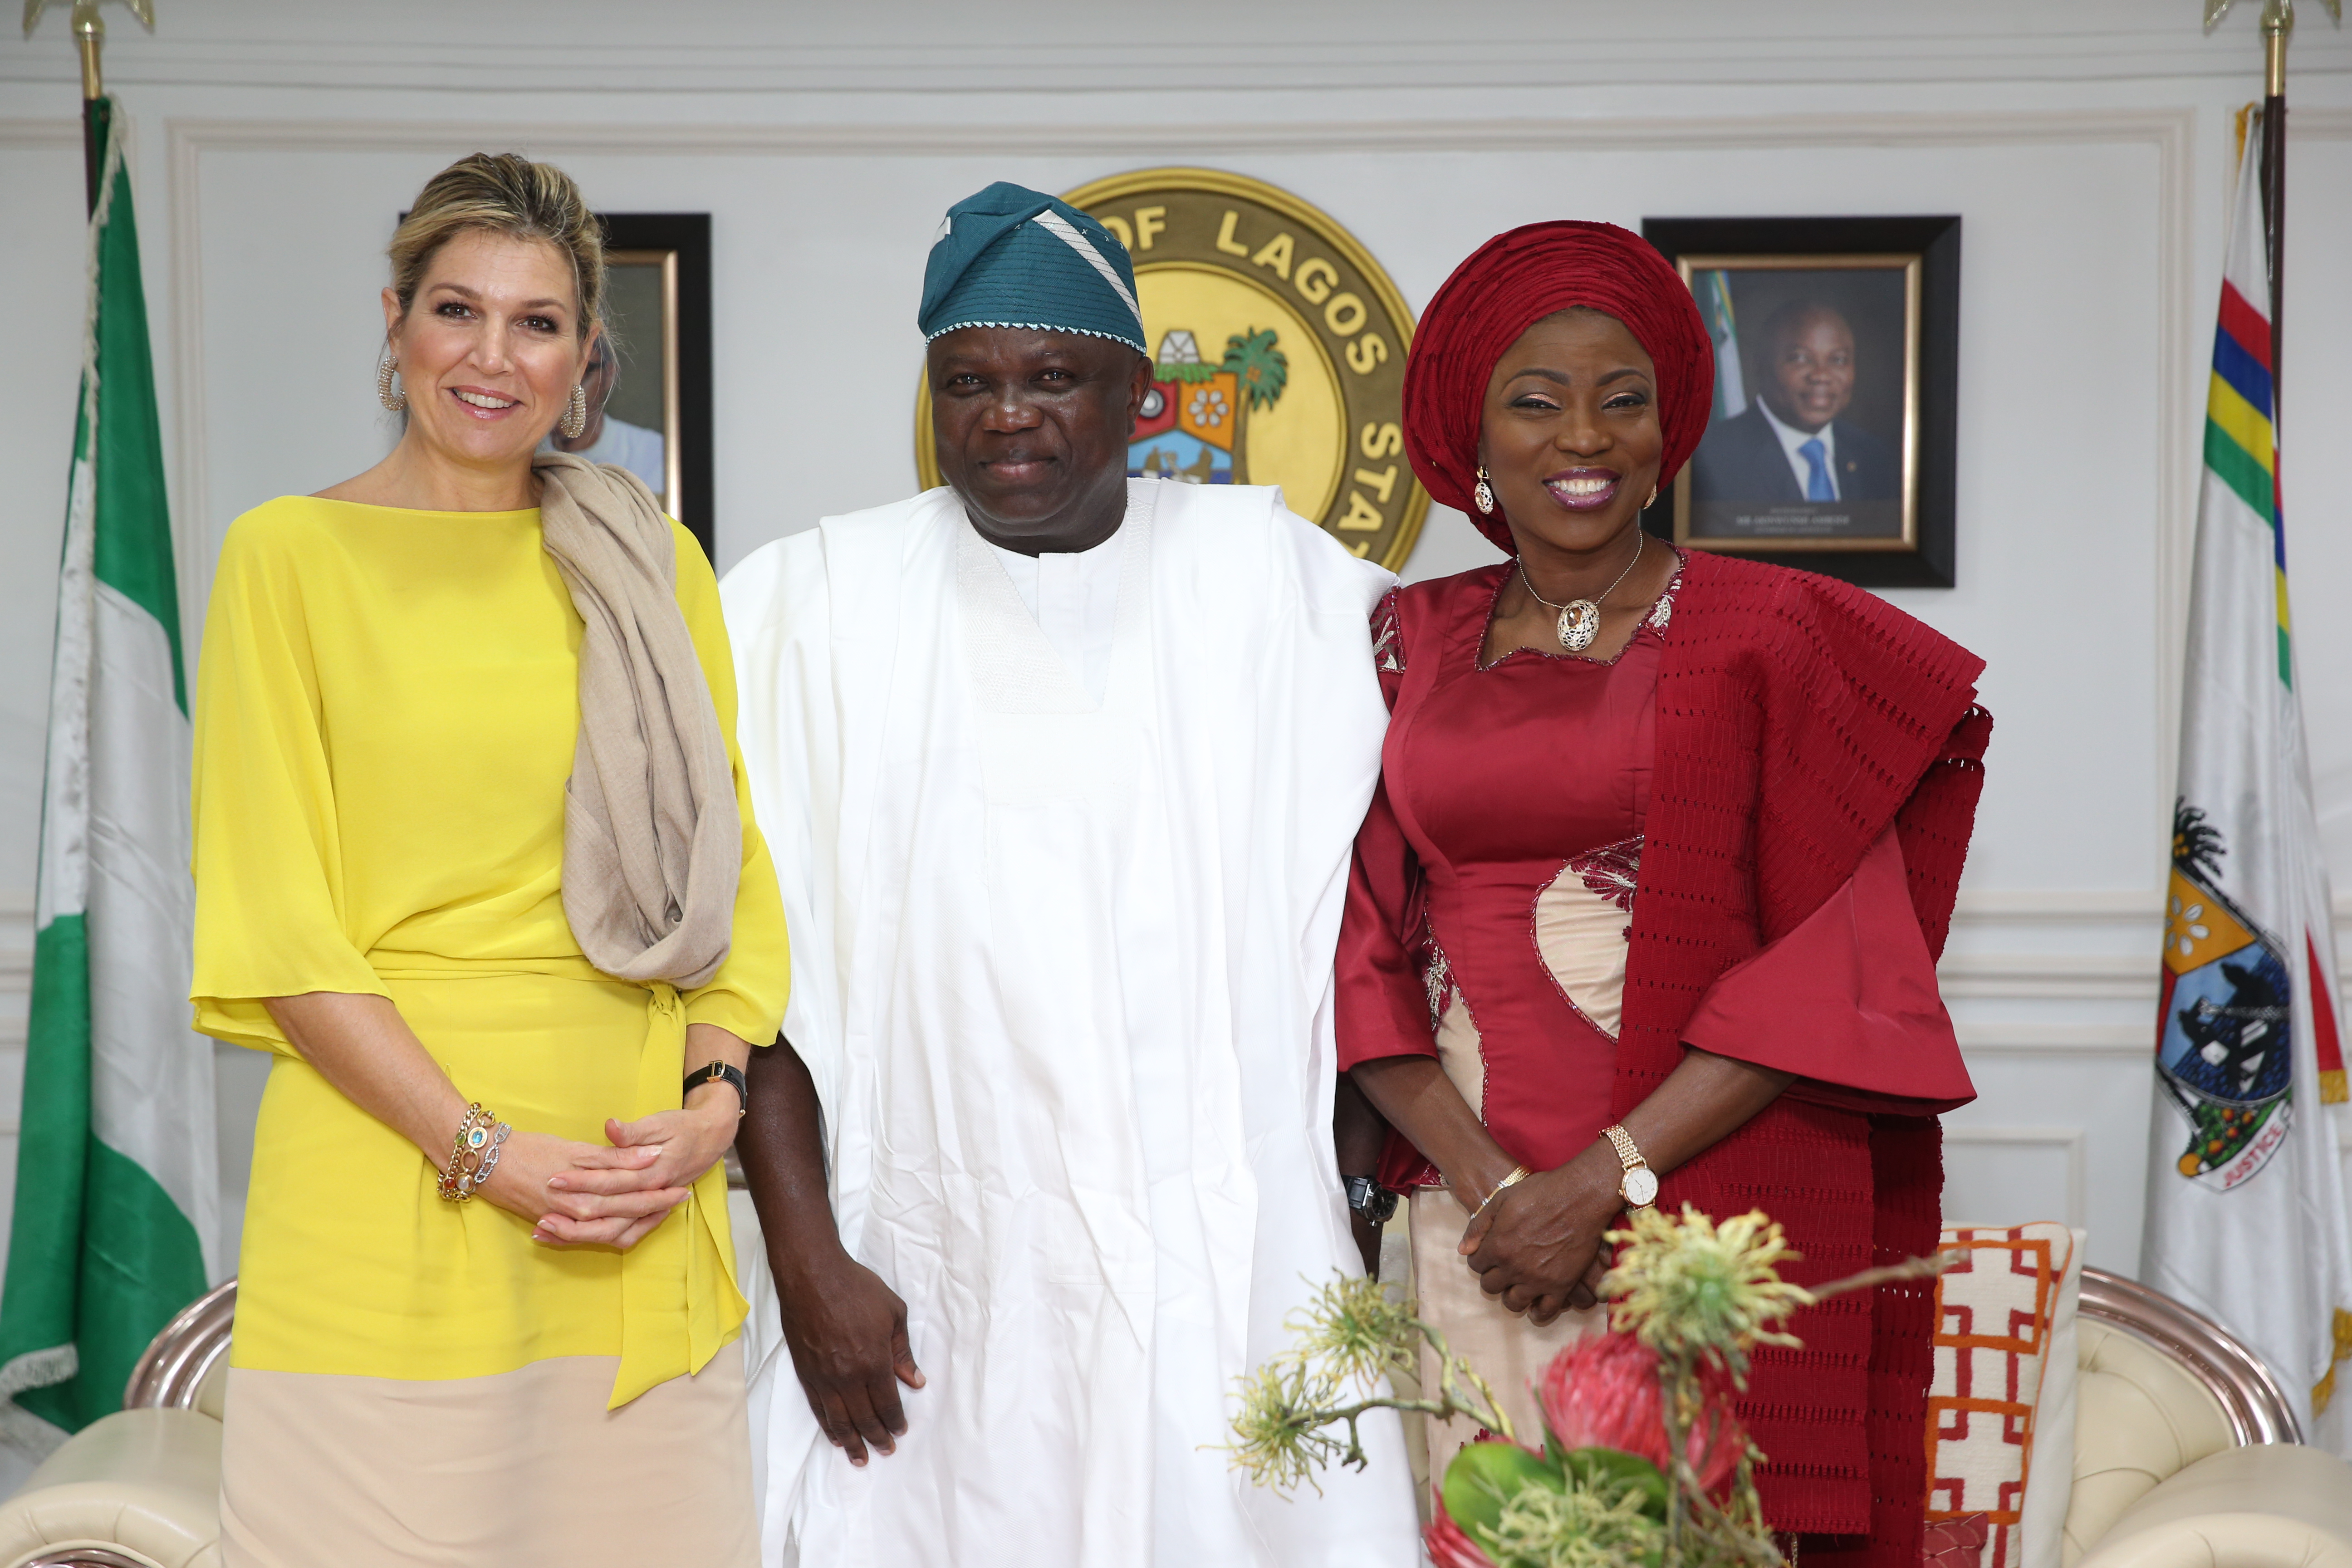 Lagos State Governor, Mr. Akinwunmi Ambode (middle); his wife, Bolanle (right) and Queen Maxima Zorreguieta Cerruti of the Netherlands (left) during the Queen’s courtesy visit at the Lagos House, Ikeja, on Tuesday, October 31, 2017. 